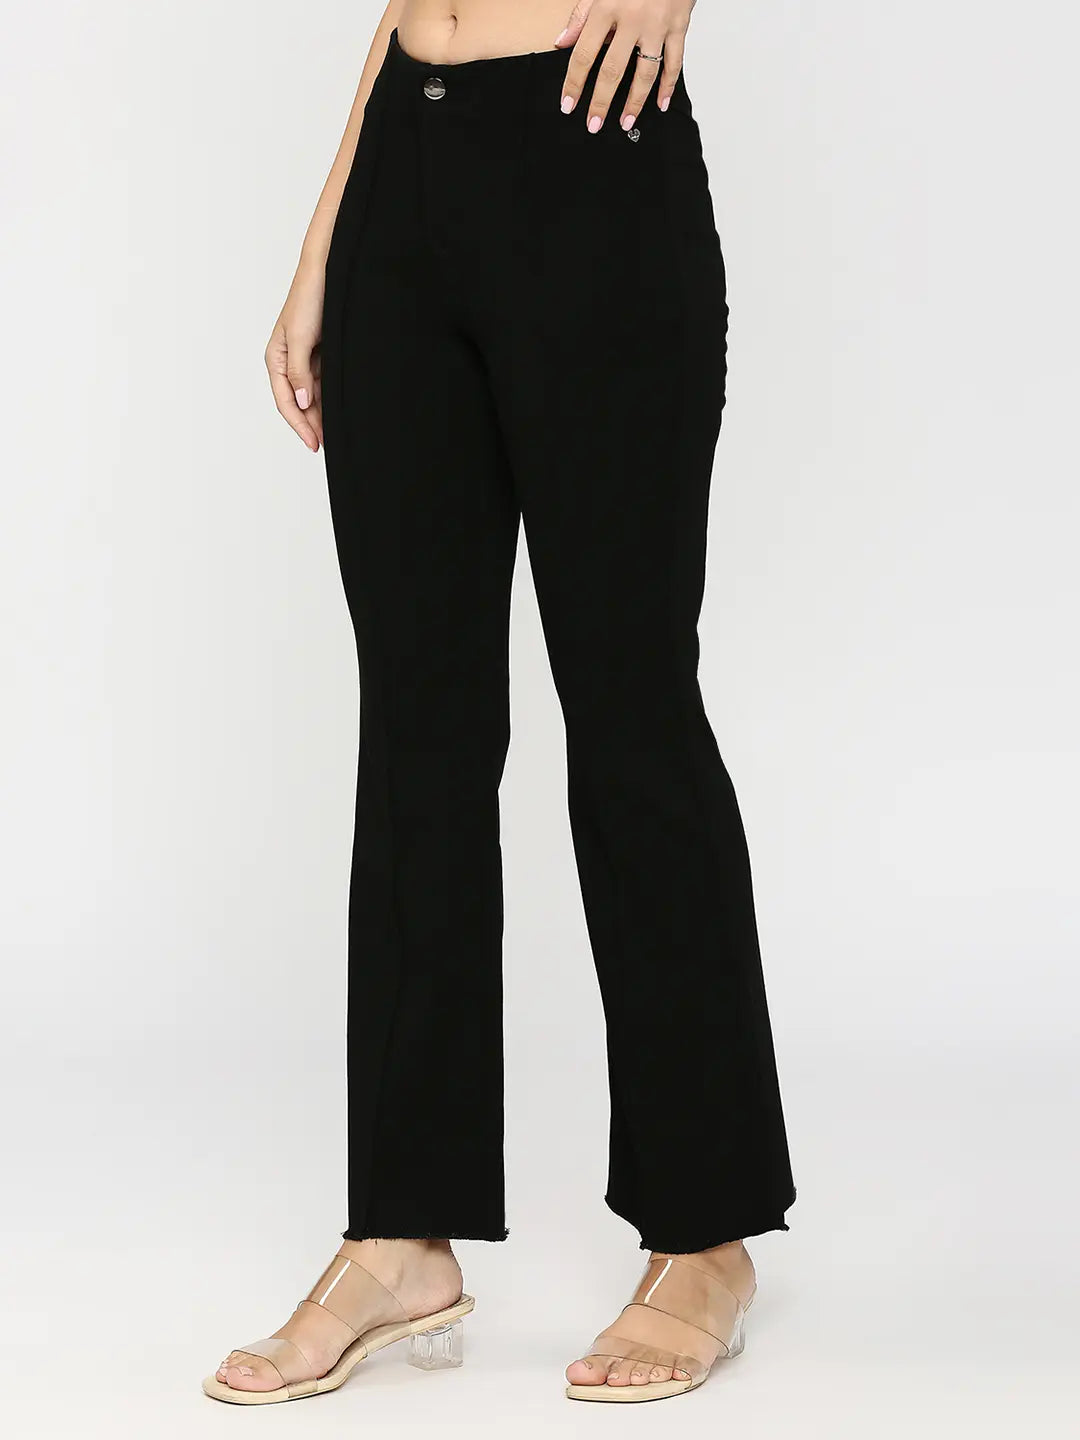 Mid-Rise Ankle-Length Pants